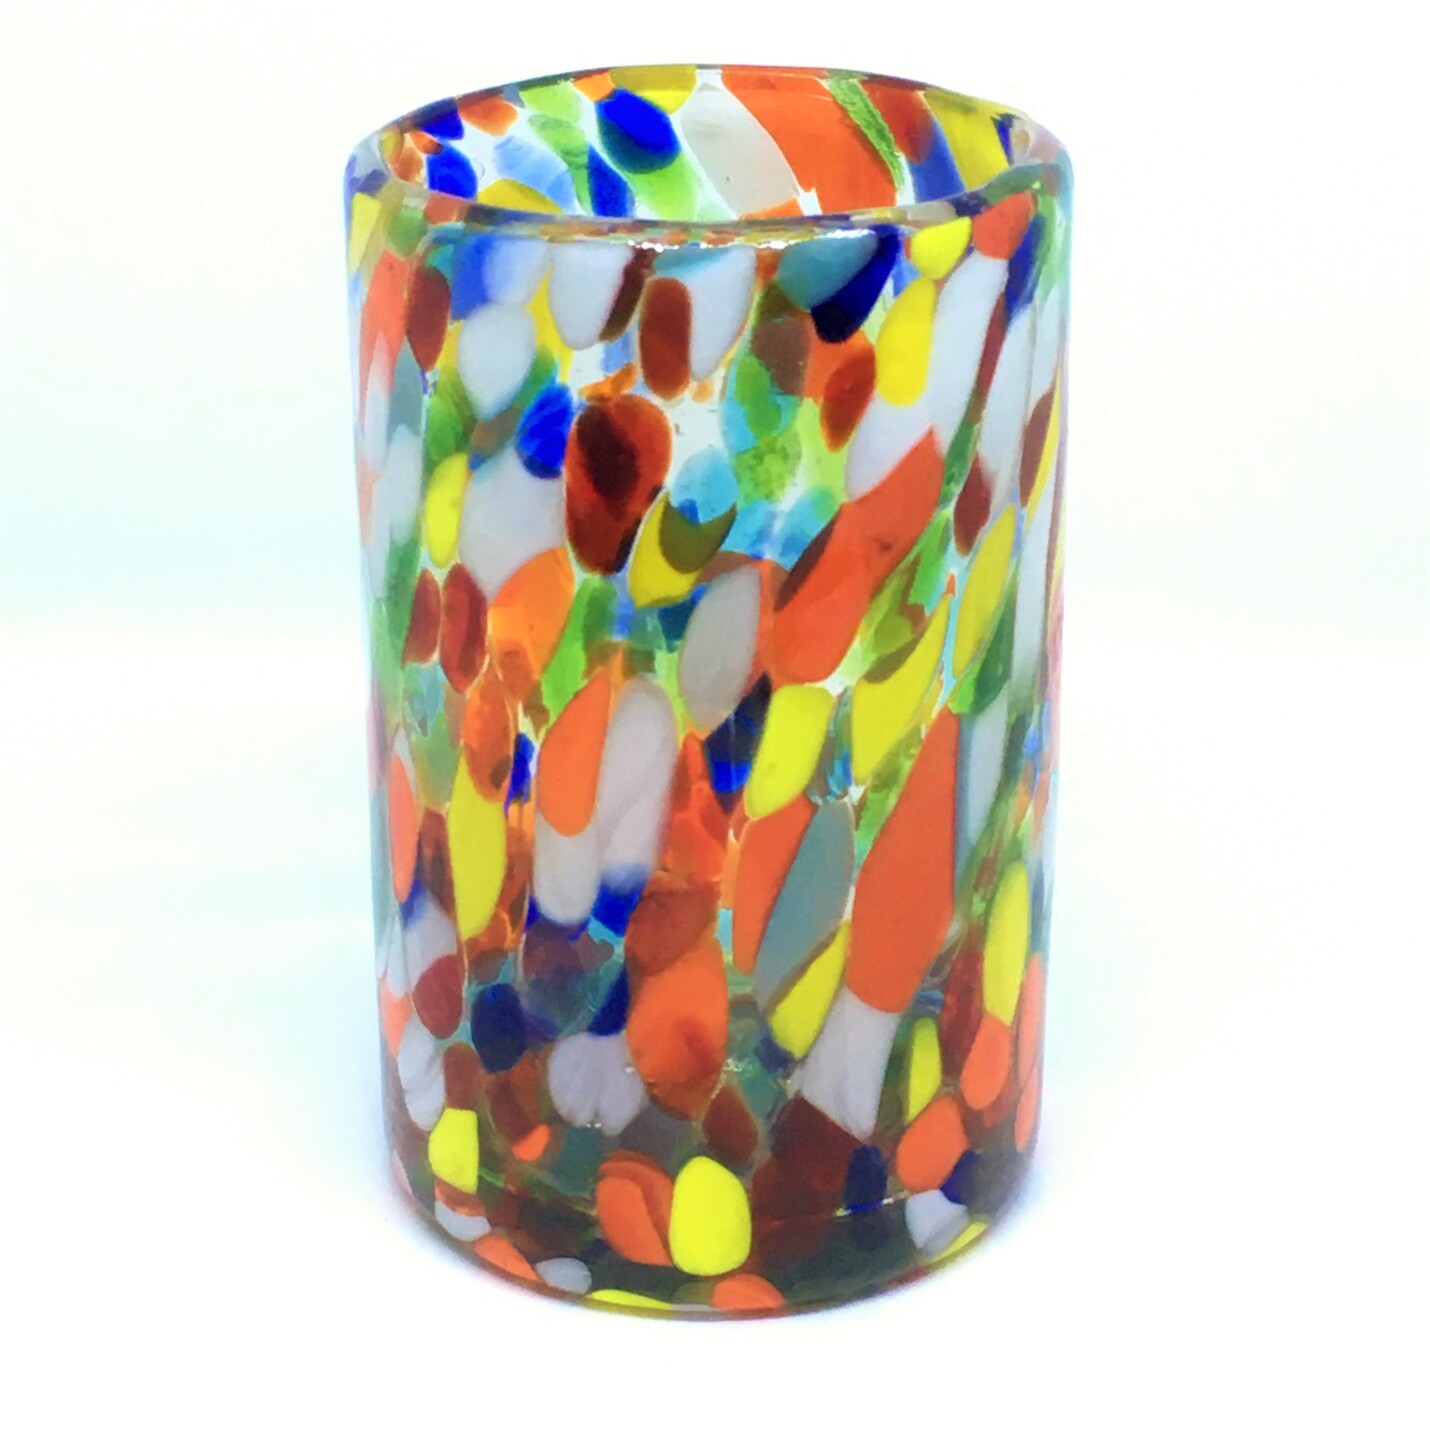 Wholesale MEXICAN GLASSWARE / Confetti Carnival 14 oz Drinking Glasses  / Let the spring come into your home with this colorful set of glasses. The multicolor glass decoration makes them a standout in any place.